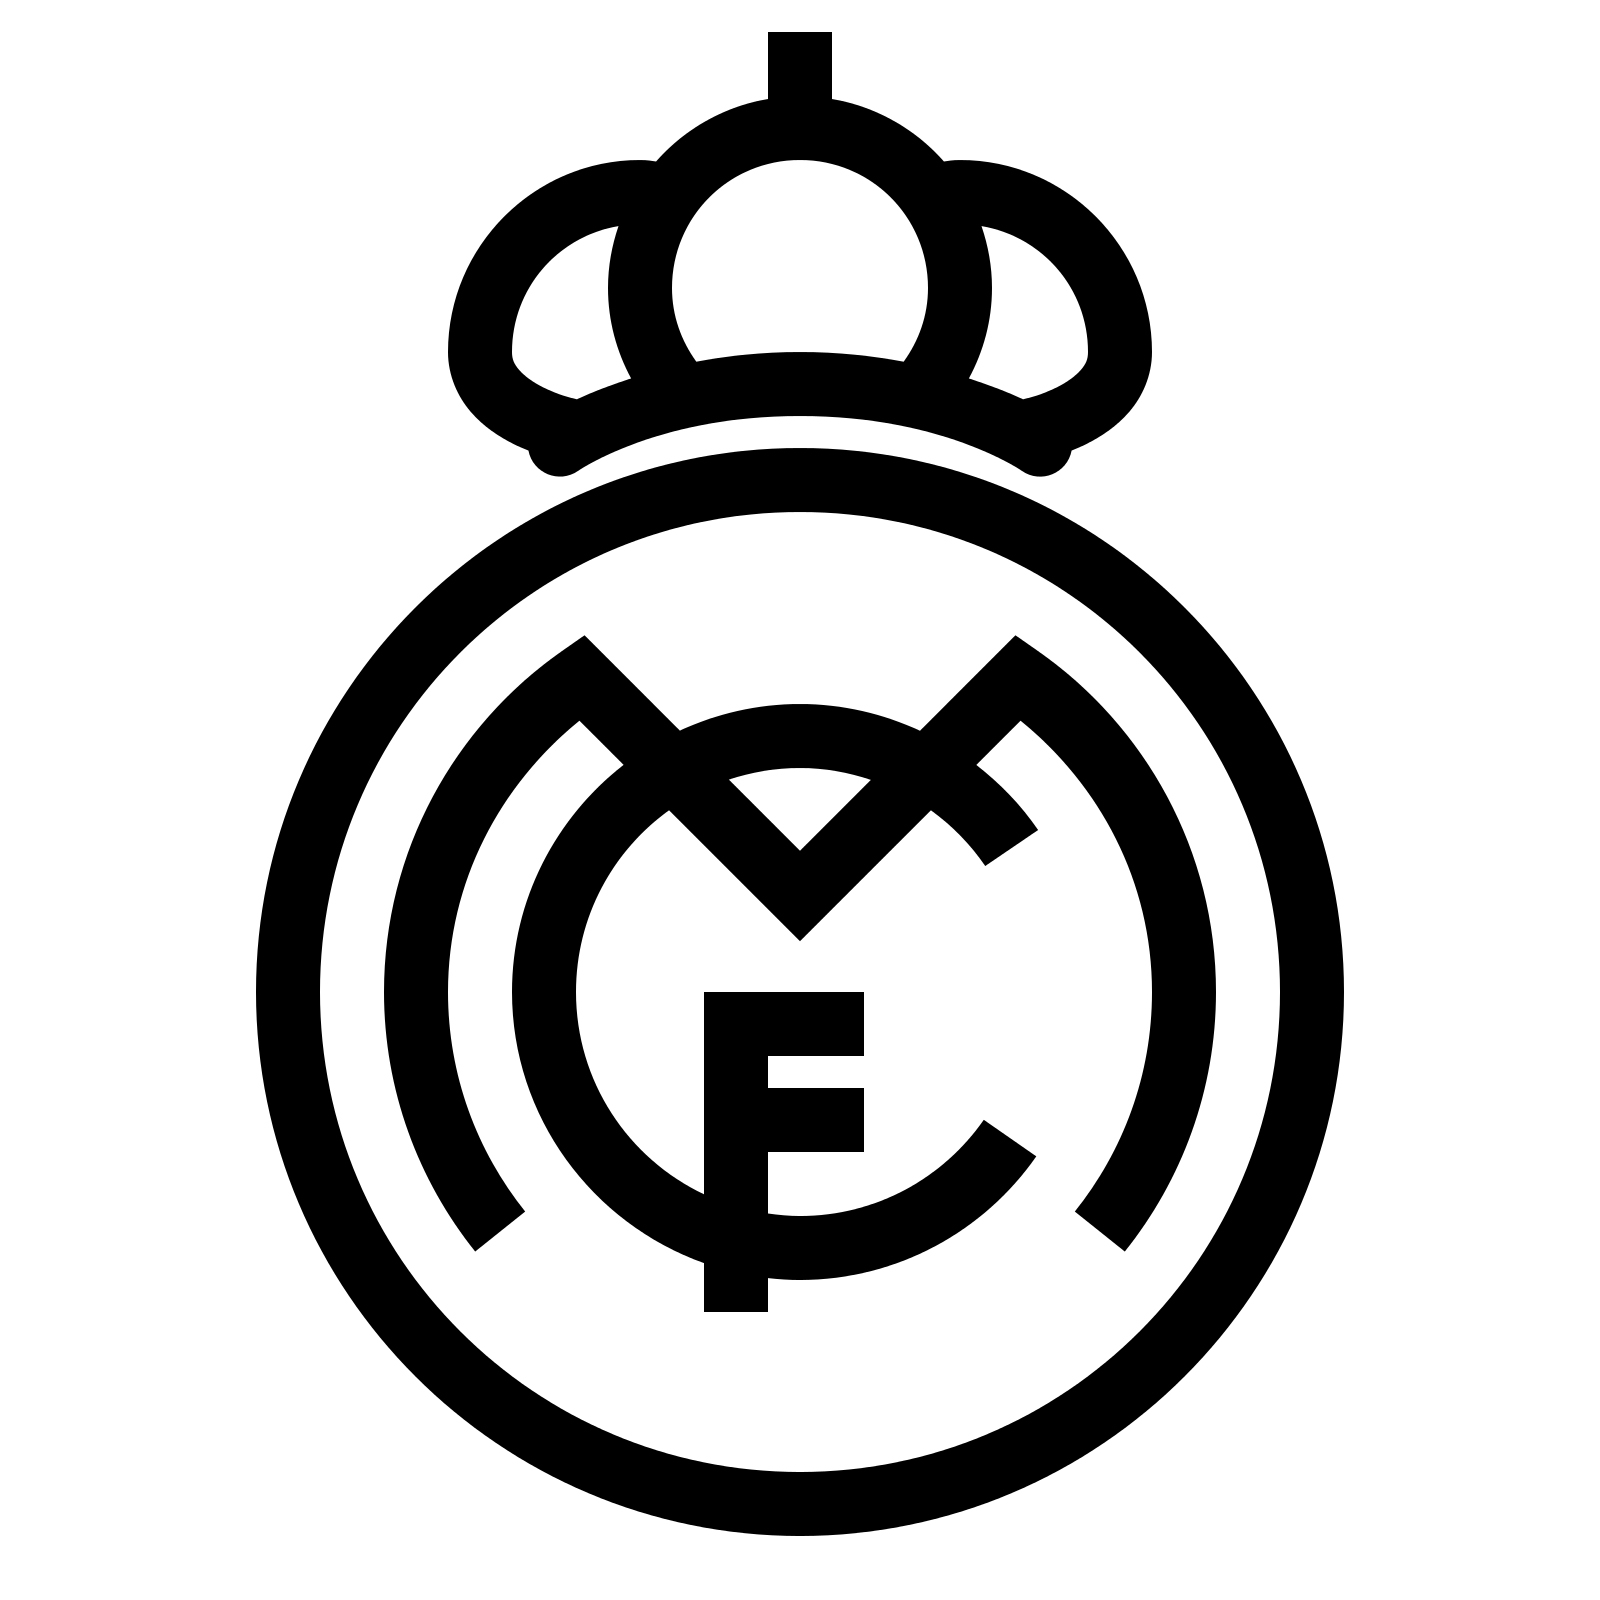 Real Madrid Logo Drawing at GetDrawings.com - Free for personal use ...